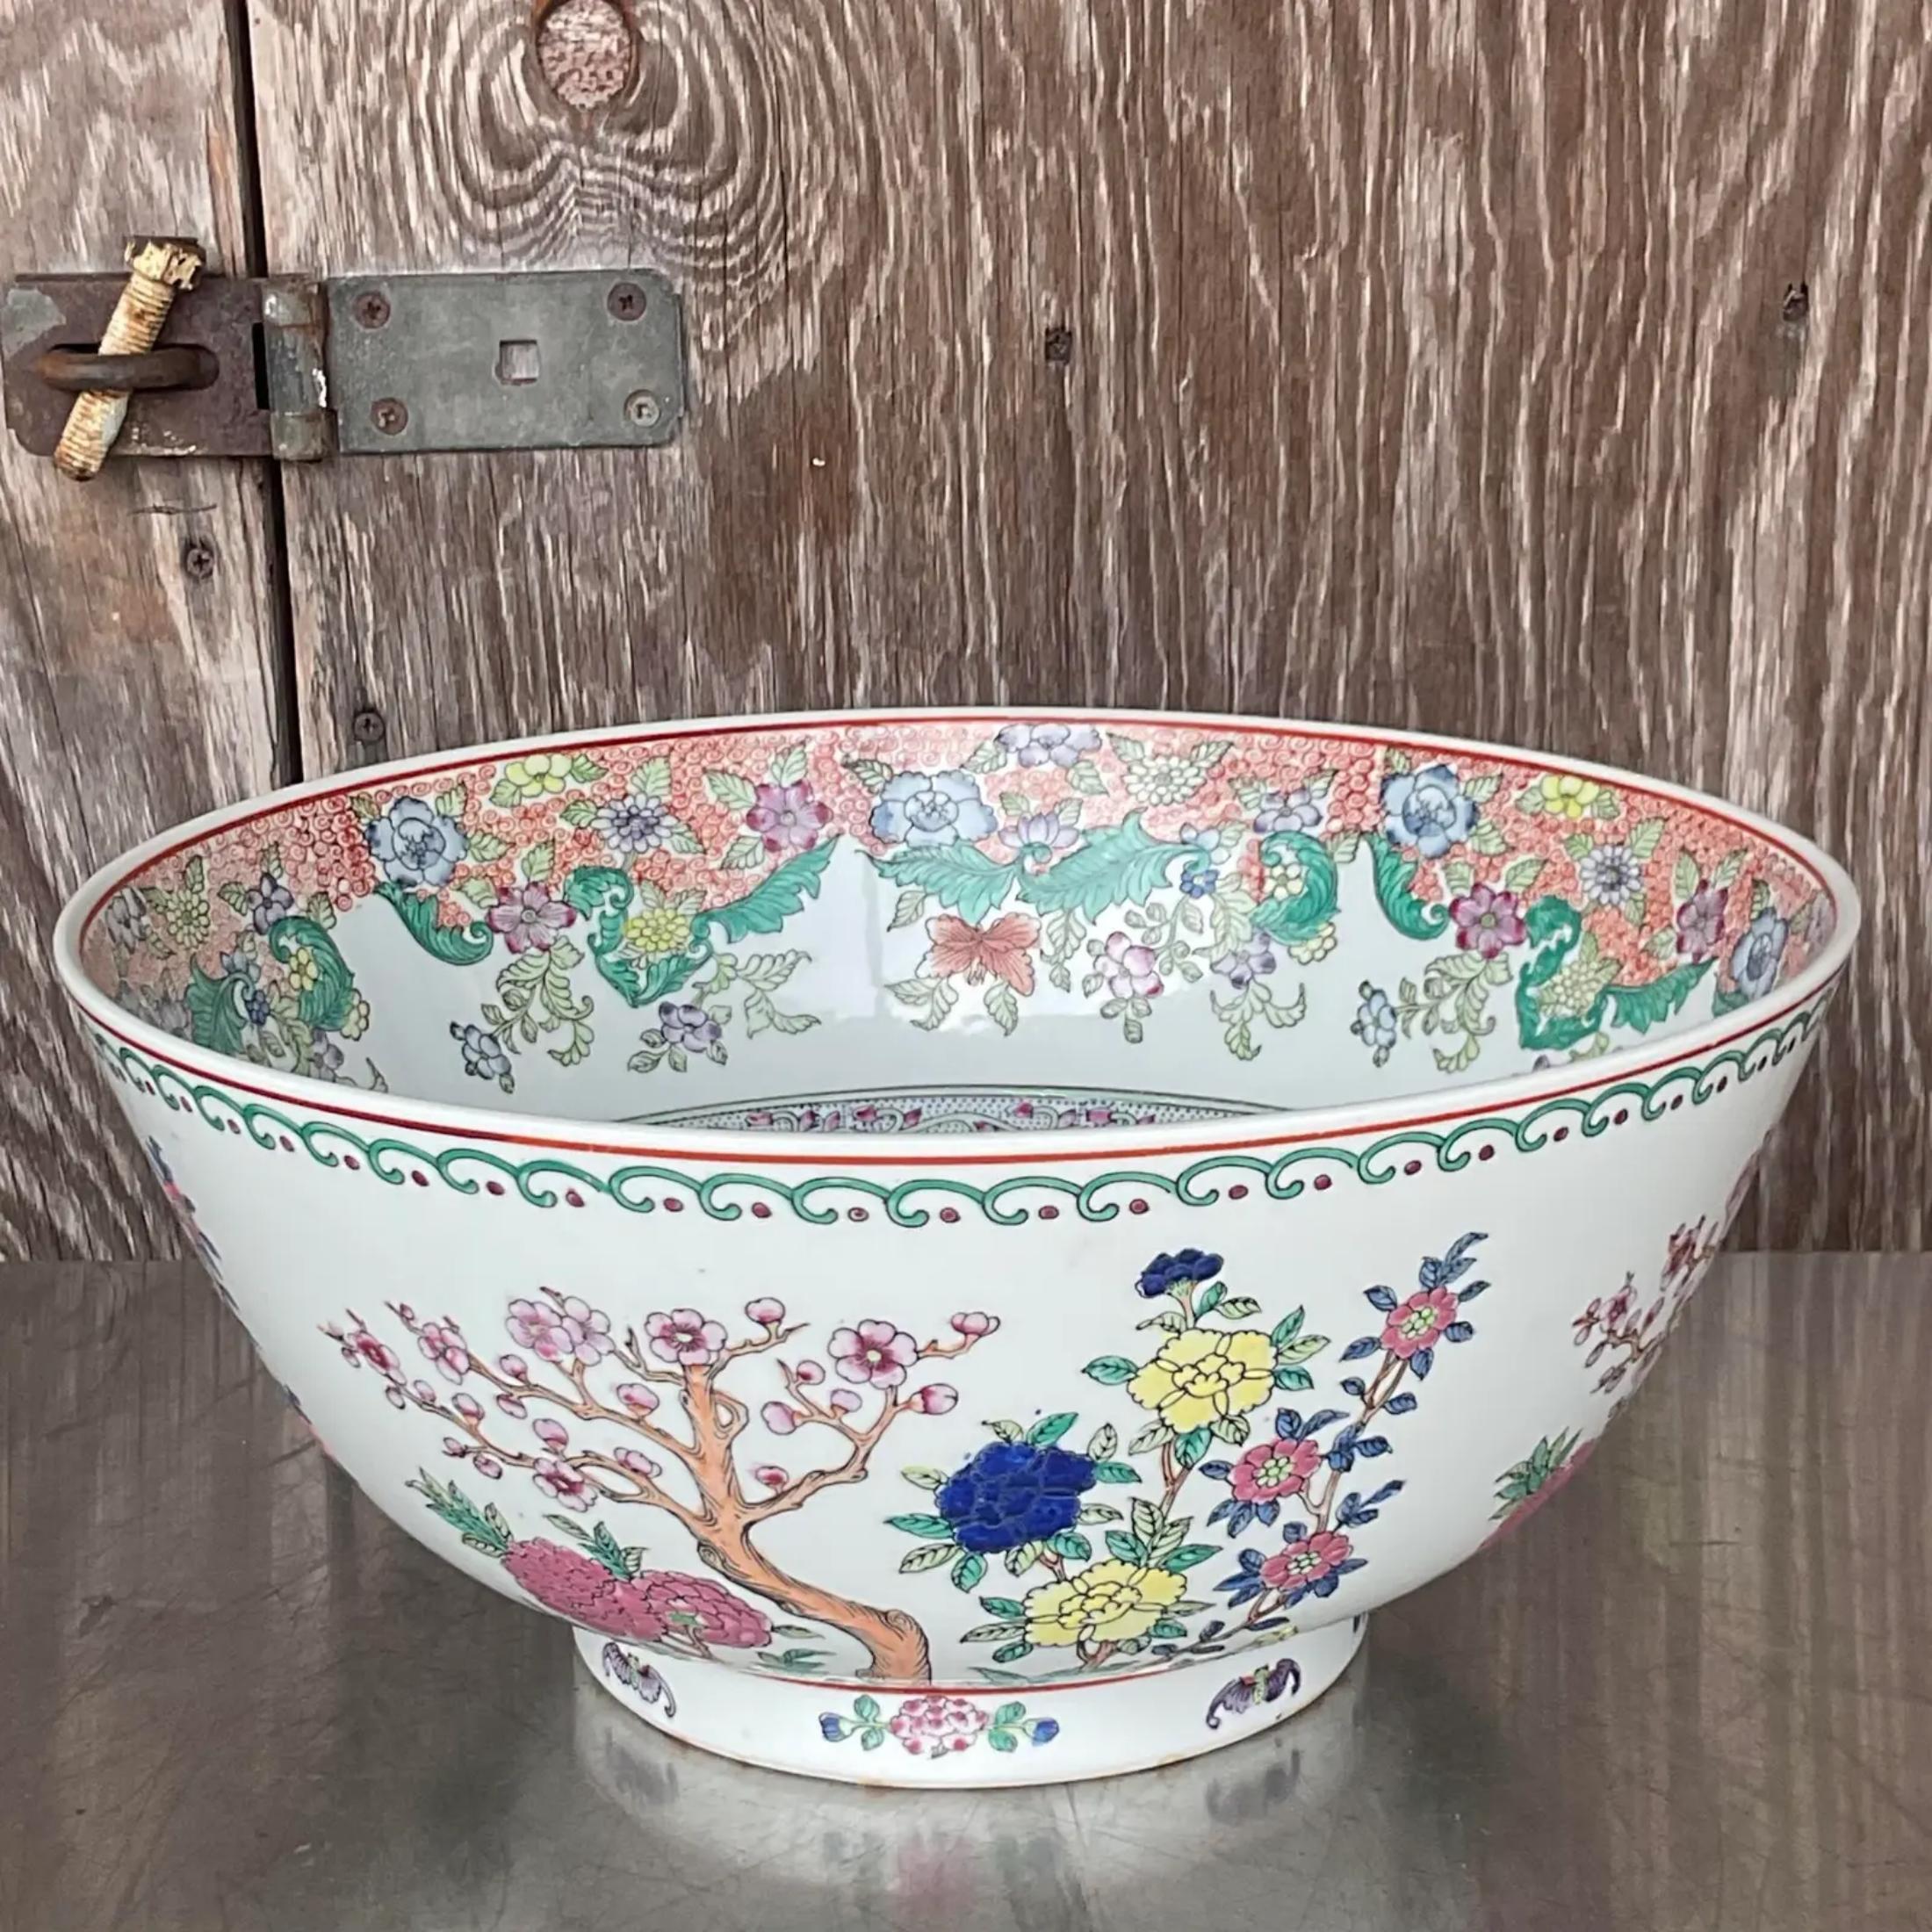 A fabulous vintage Asian centerpiece ceramic bowl. A classic Asian design with vines and flowers. Acquired from a Palm Beach estate.